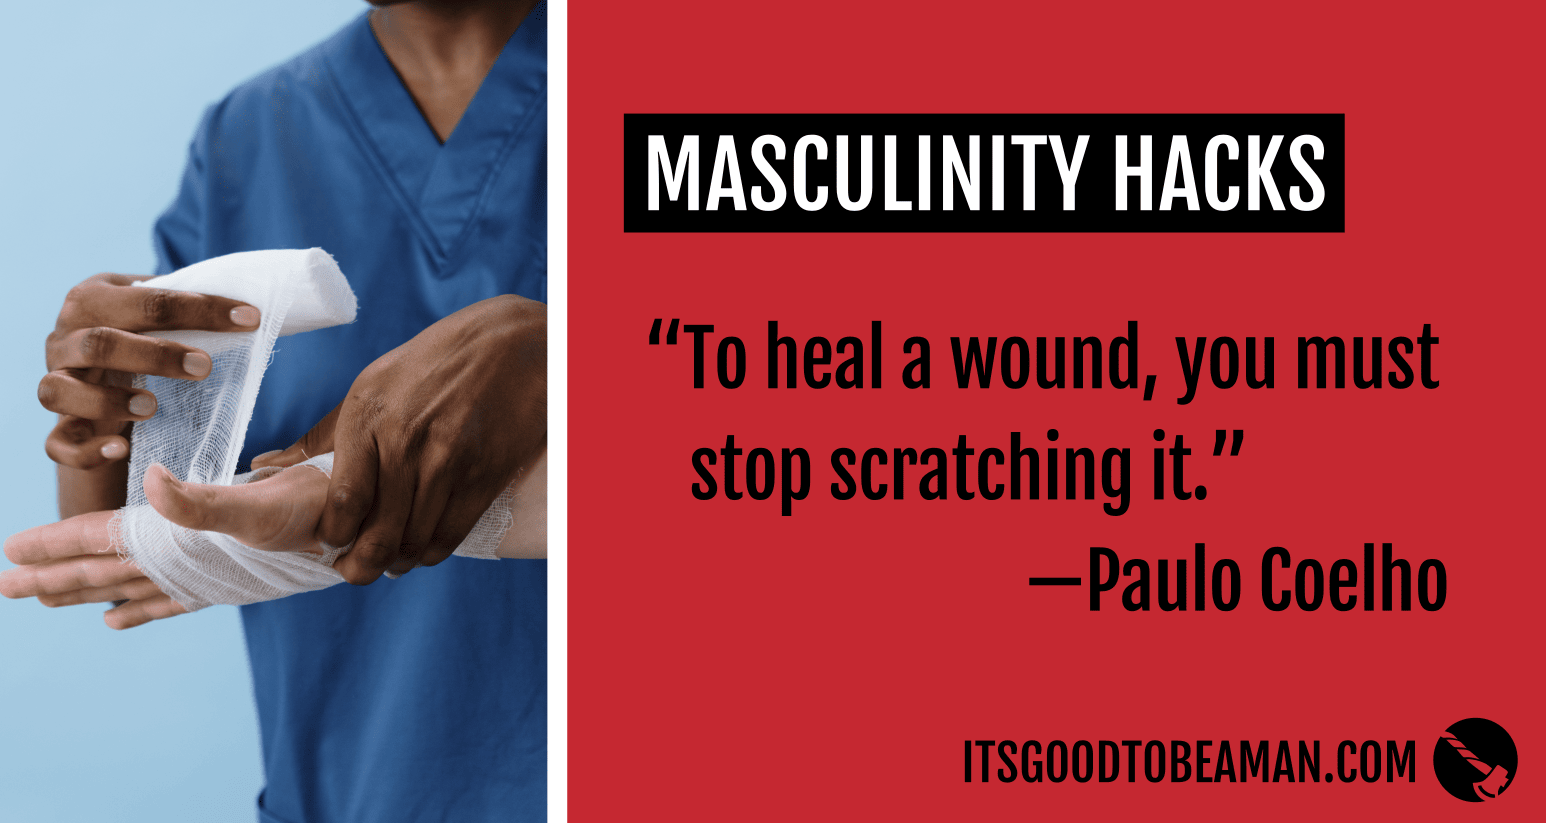 “To a heal a wound, you must stop scratching it.” —Paulo Coelho